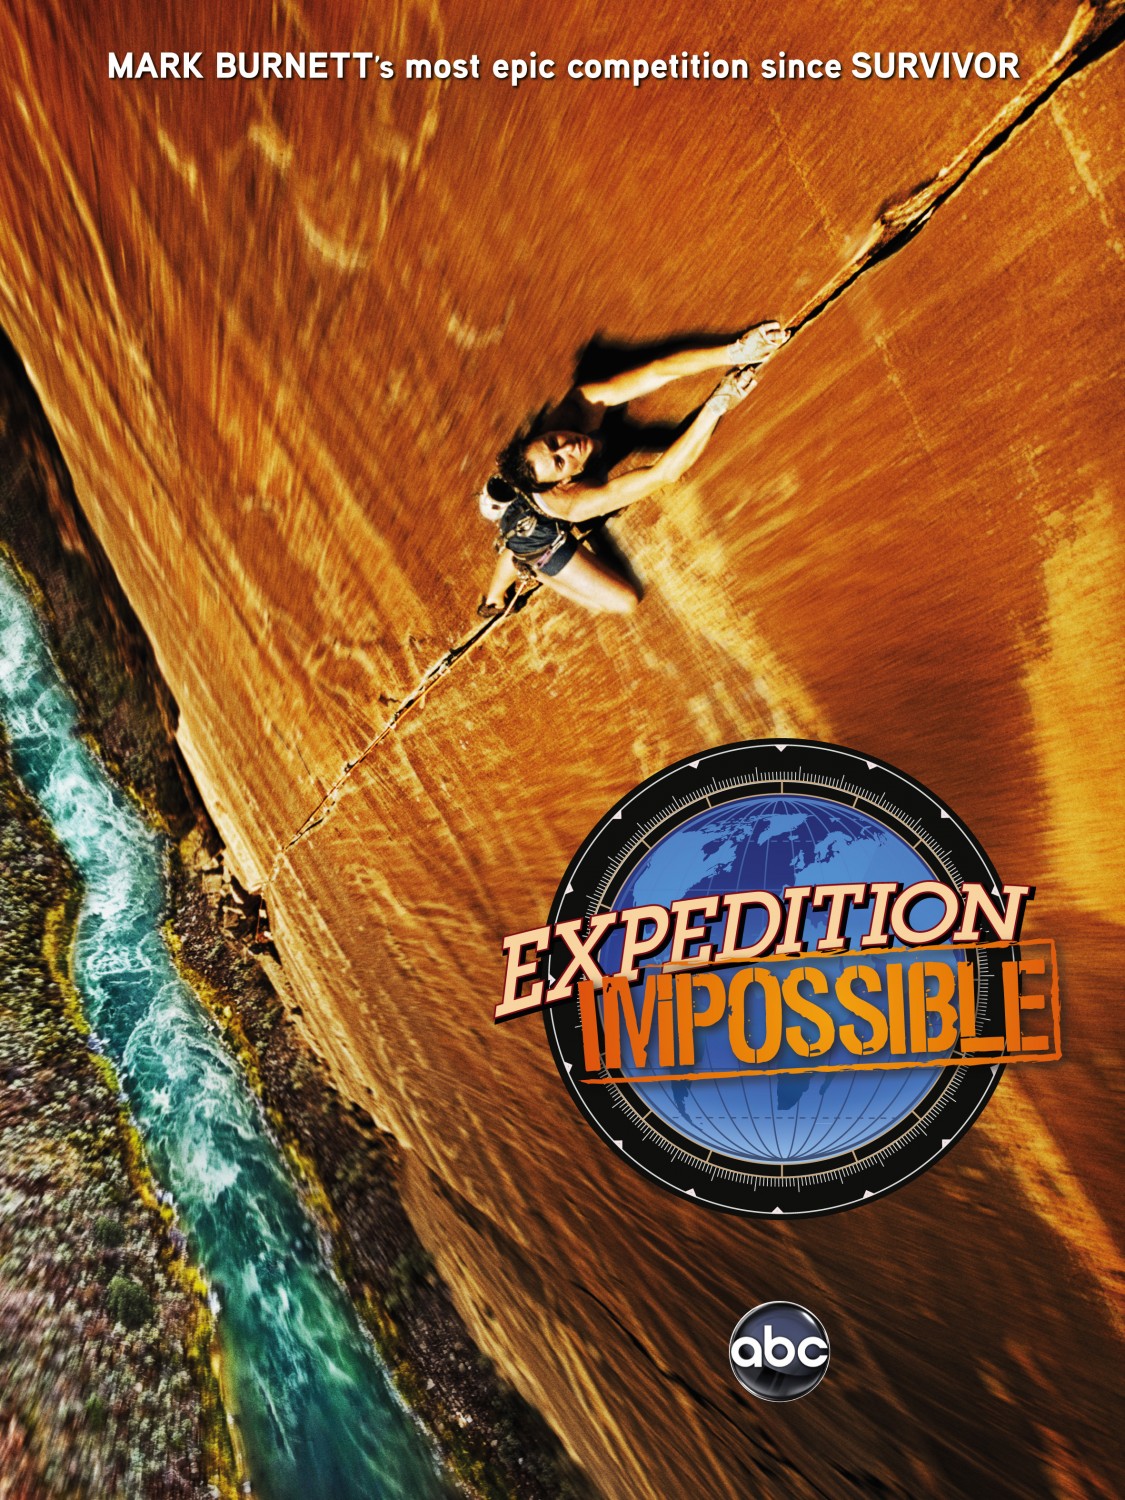 Extra Large TV Poster Image for Expedition Impossible 